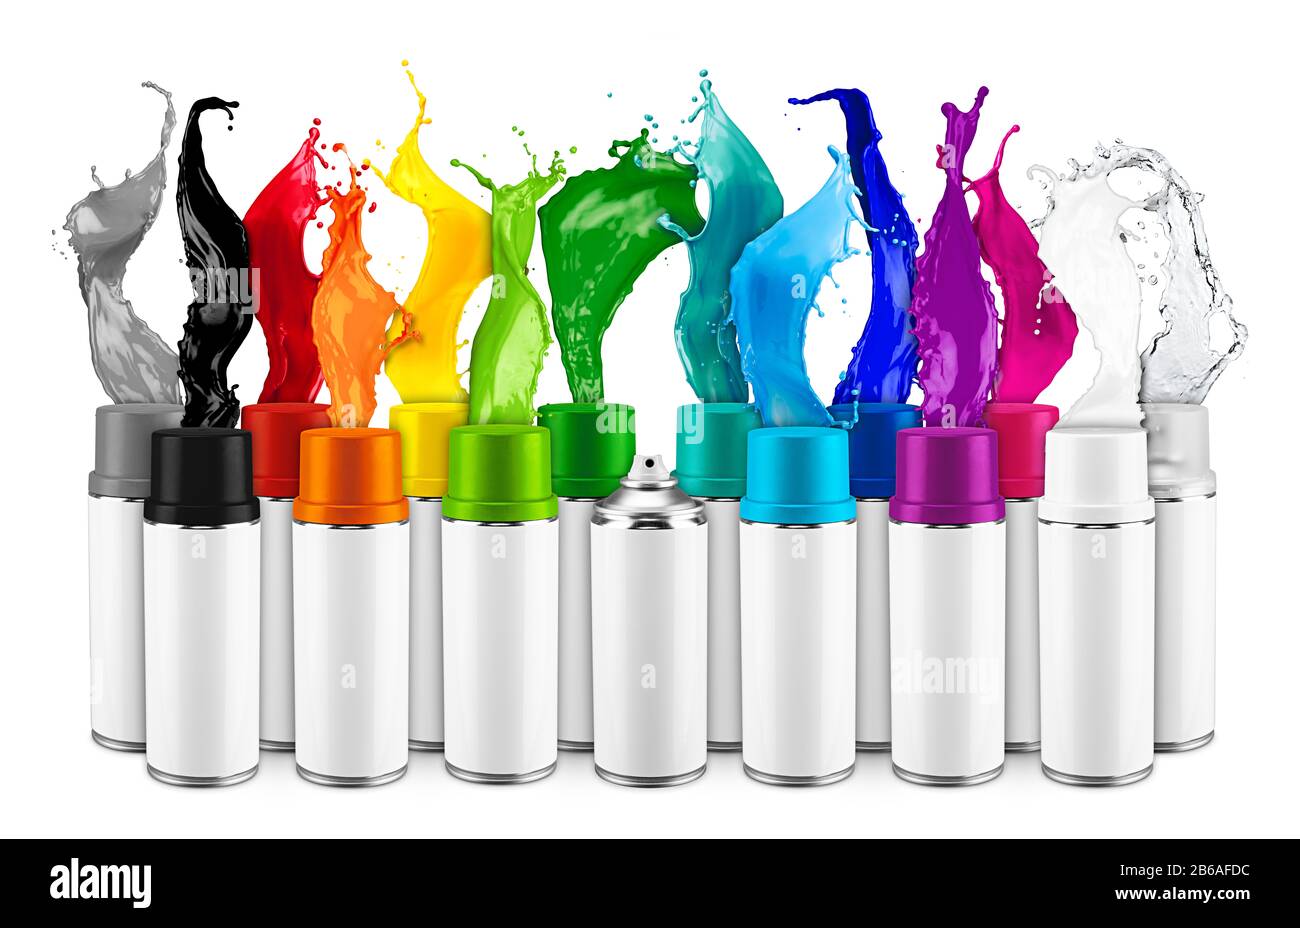 row of many various spray can spraying colorful rainbow paint liquid color splash explosion isolated on white background. Industry diy paintjob graffi Stock Photo